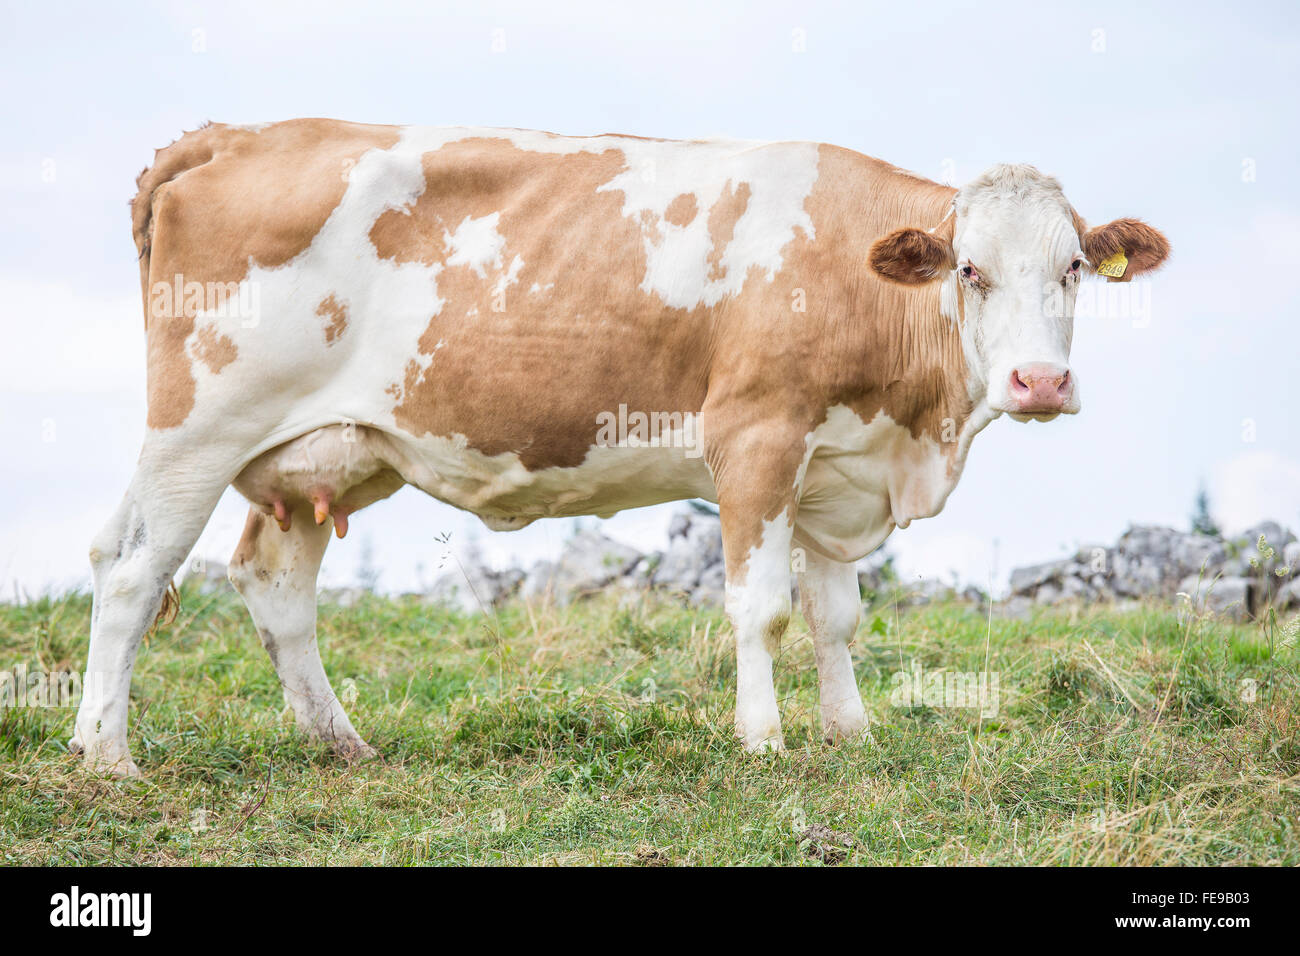 Huge cow standing on a pasture and looking at camera Stock Photo